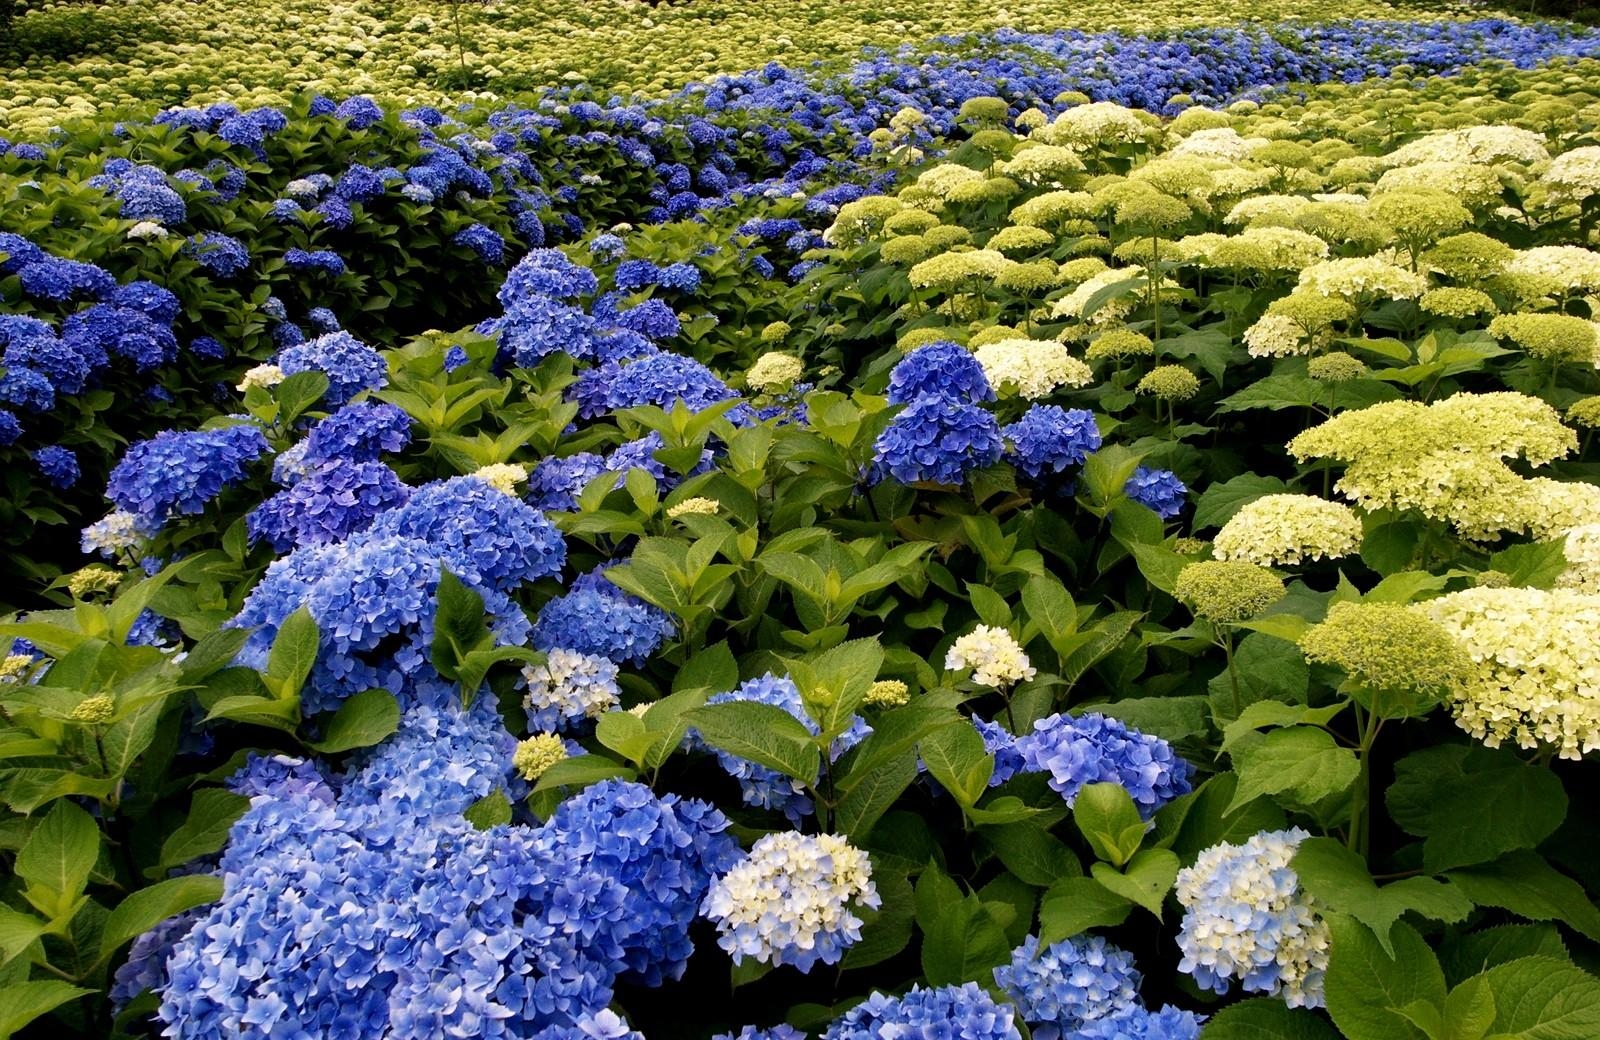 greens, hydrangea, different, flowers, park, bloom, flowering High Definition image